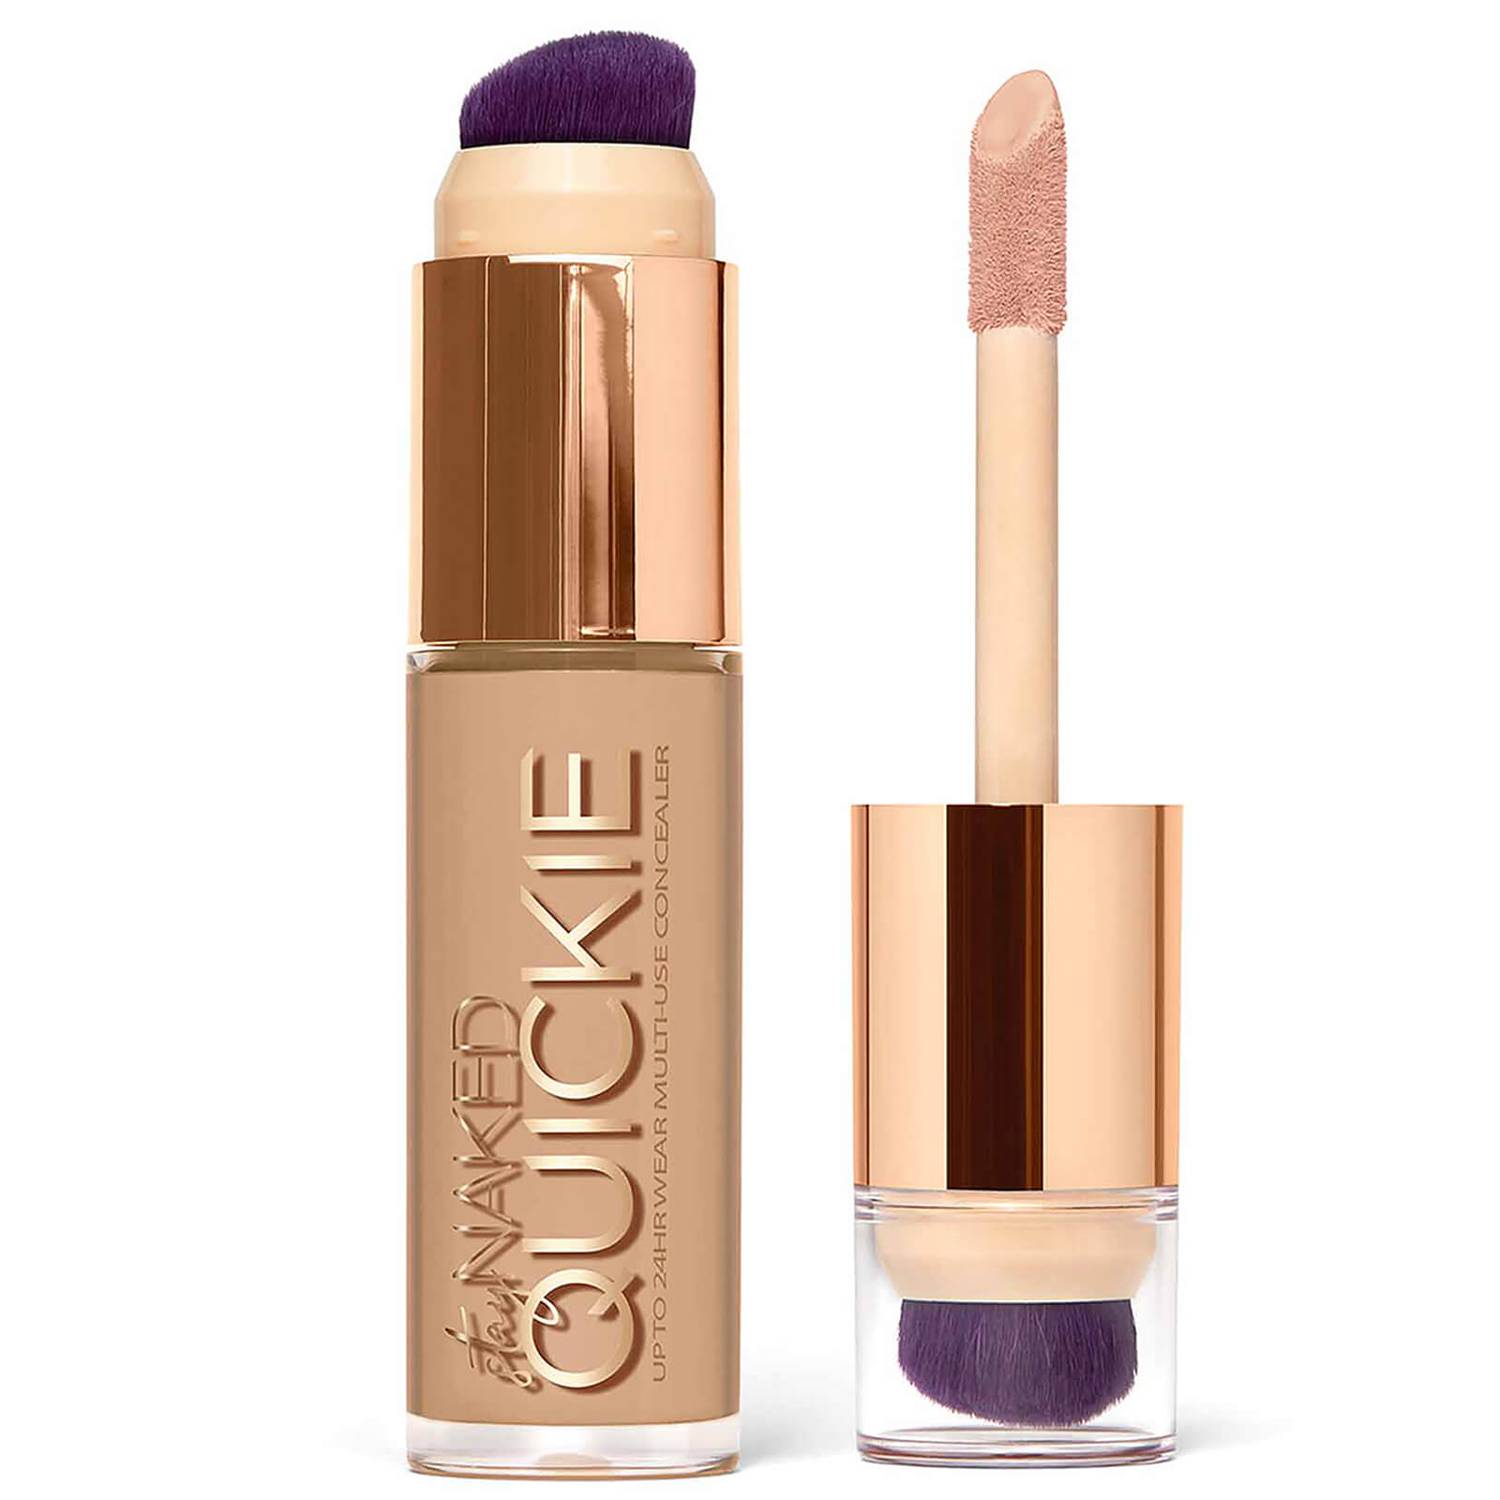 Urban Decay Stay Naked Quickie 24 Hour Full Coverage Waterproof Concealer